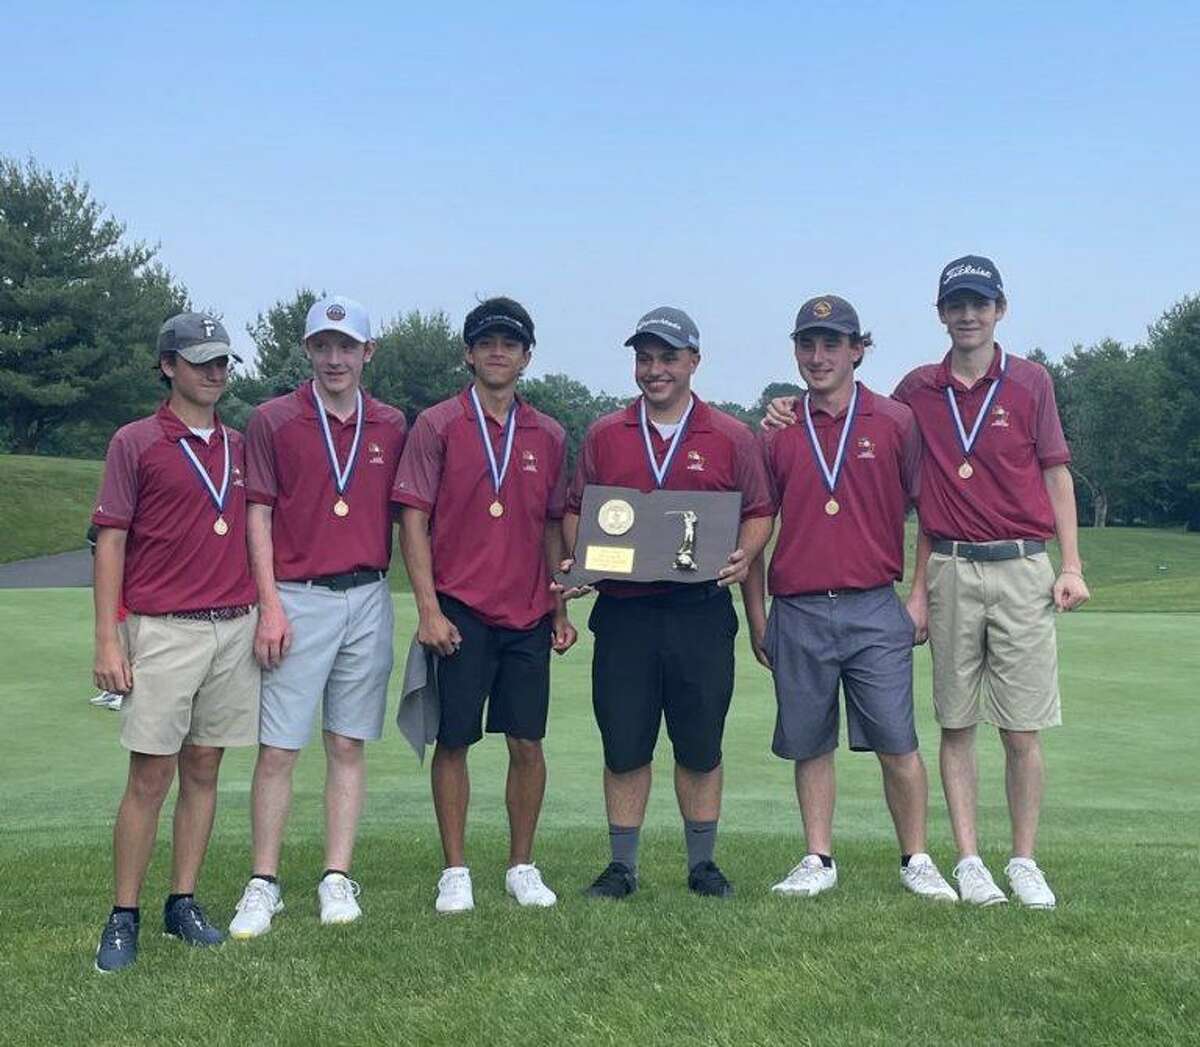 St. Joseph golf team members Andrew Flynn, Colin Firda, Luke Fortin, Billy Lesko, Anthony Jacozzi and Robbie Sluga stand with the CIAC Division III championship plaque.